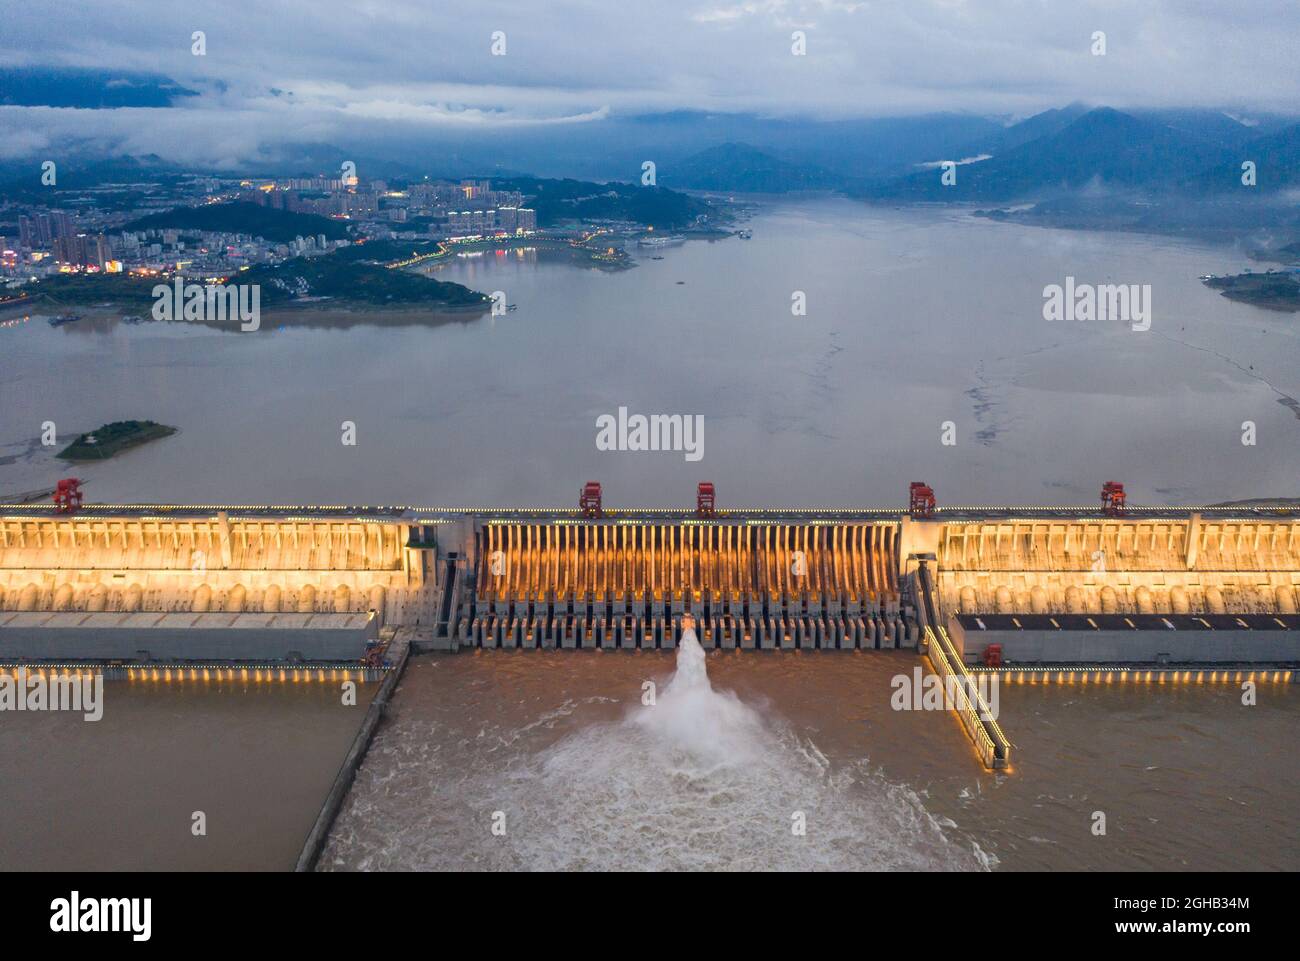 Yichang, China. 6th Sep 2021.  Aerial photo taken on Sept. 6, 2021 shows a view of the Three Gorges Dam in central China's Hubei Province. Chinese authorities have called for rigorous anti-flooding measures along the Yangtze River as water levels continue to rise following heavy rainfall, the Ministry of Water Resources said on Monday. The flow of water at the Three Gorges reservoir has increased rapidly, reaching 54,000 cubic meters per second as of 2 p.m. Monday. Credit: Xinhua/Alamy Live News Stock Photo